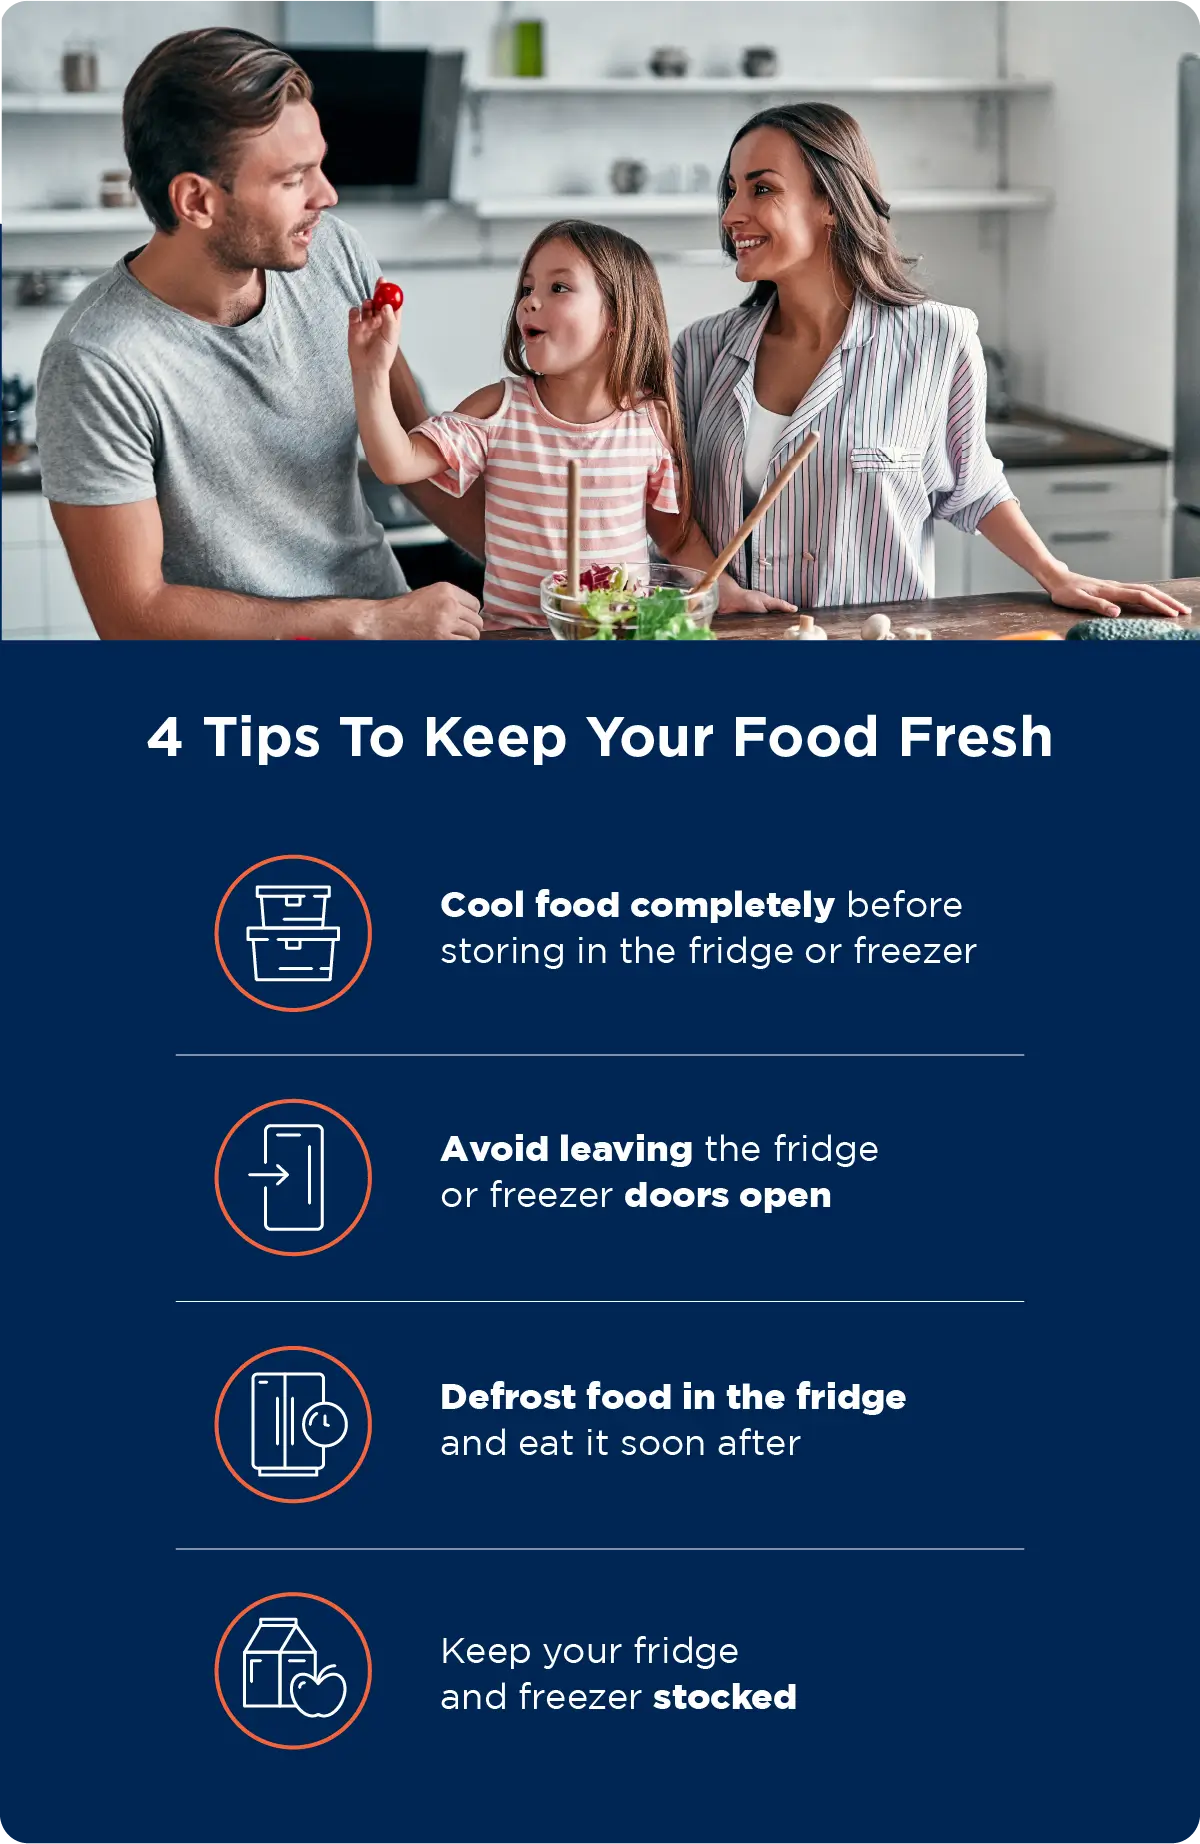 Refrigerator tips to keep your family safe and your food fresh